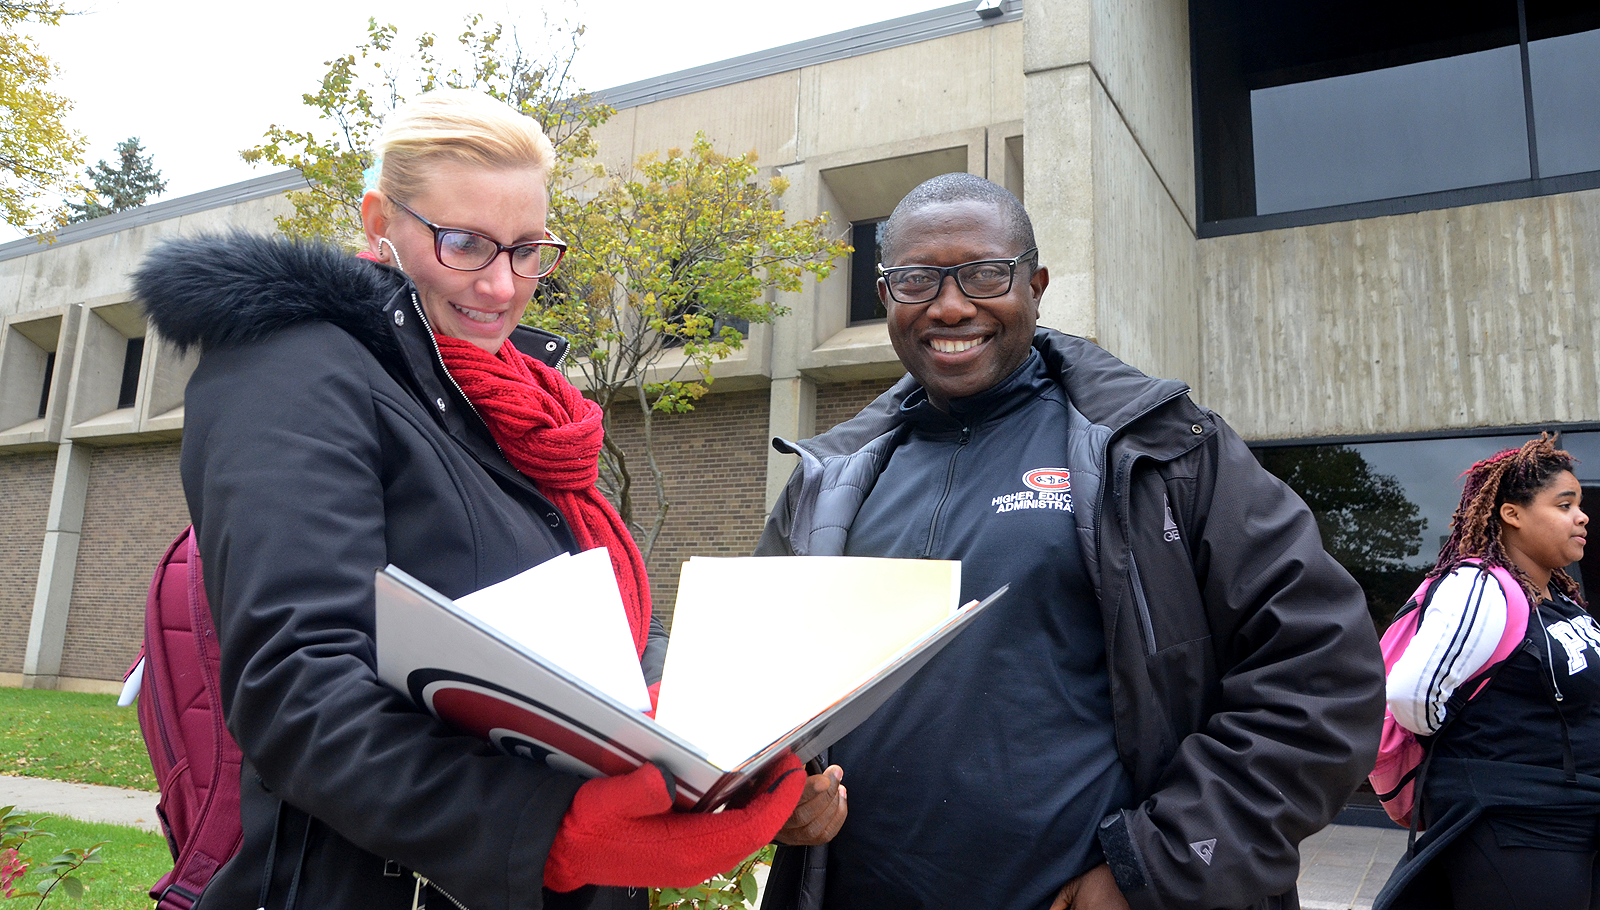 Working together at St. Cloud State University